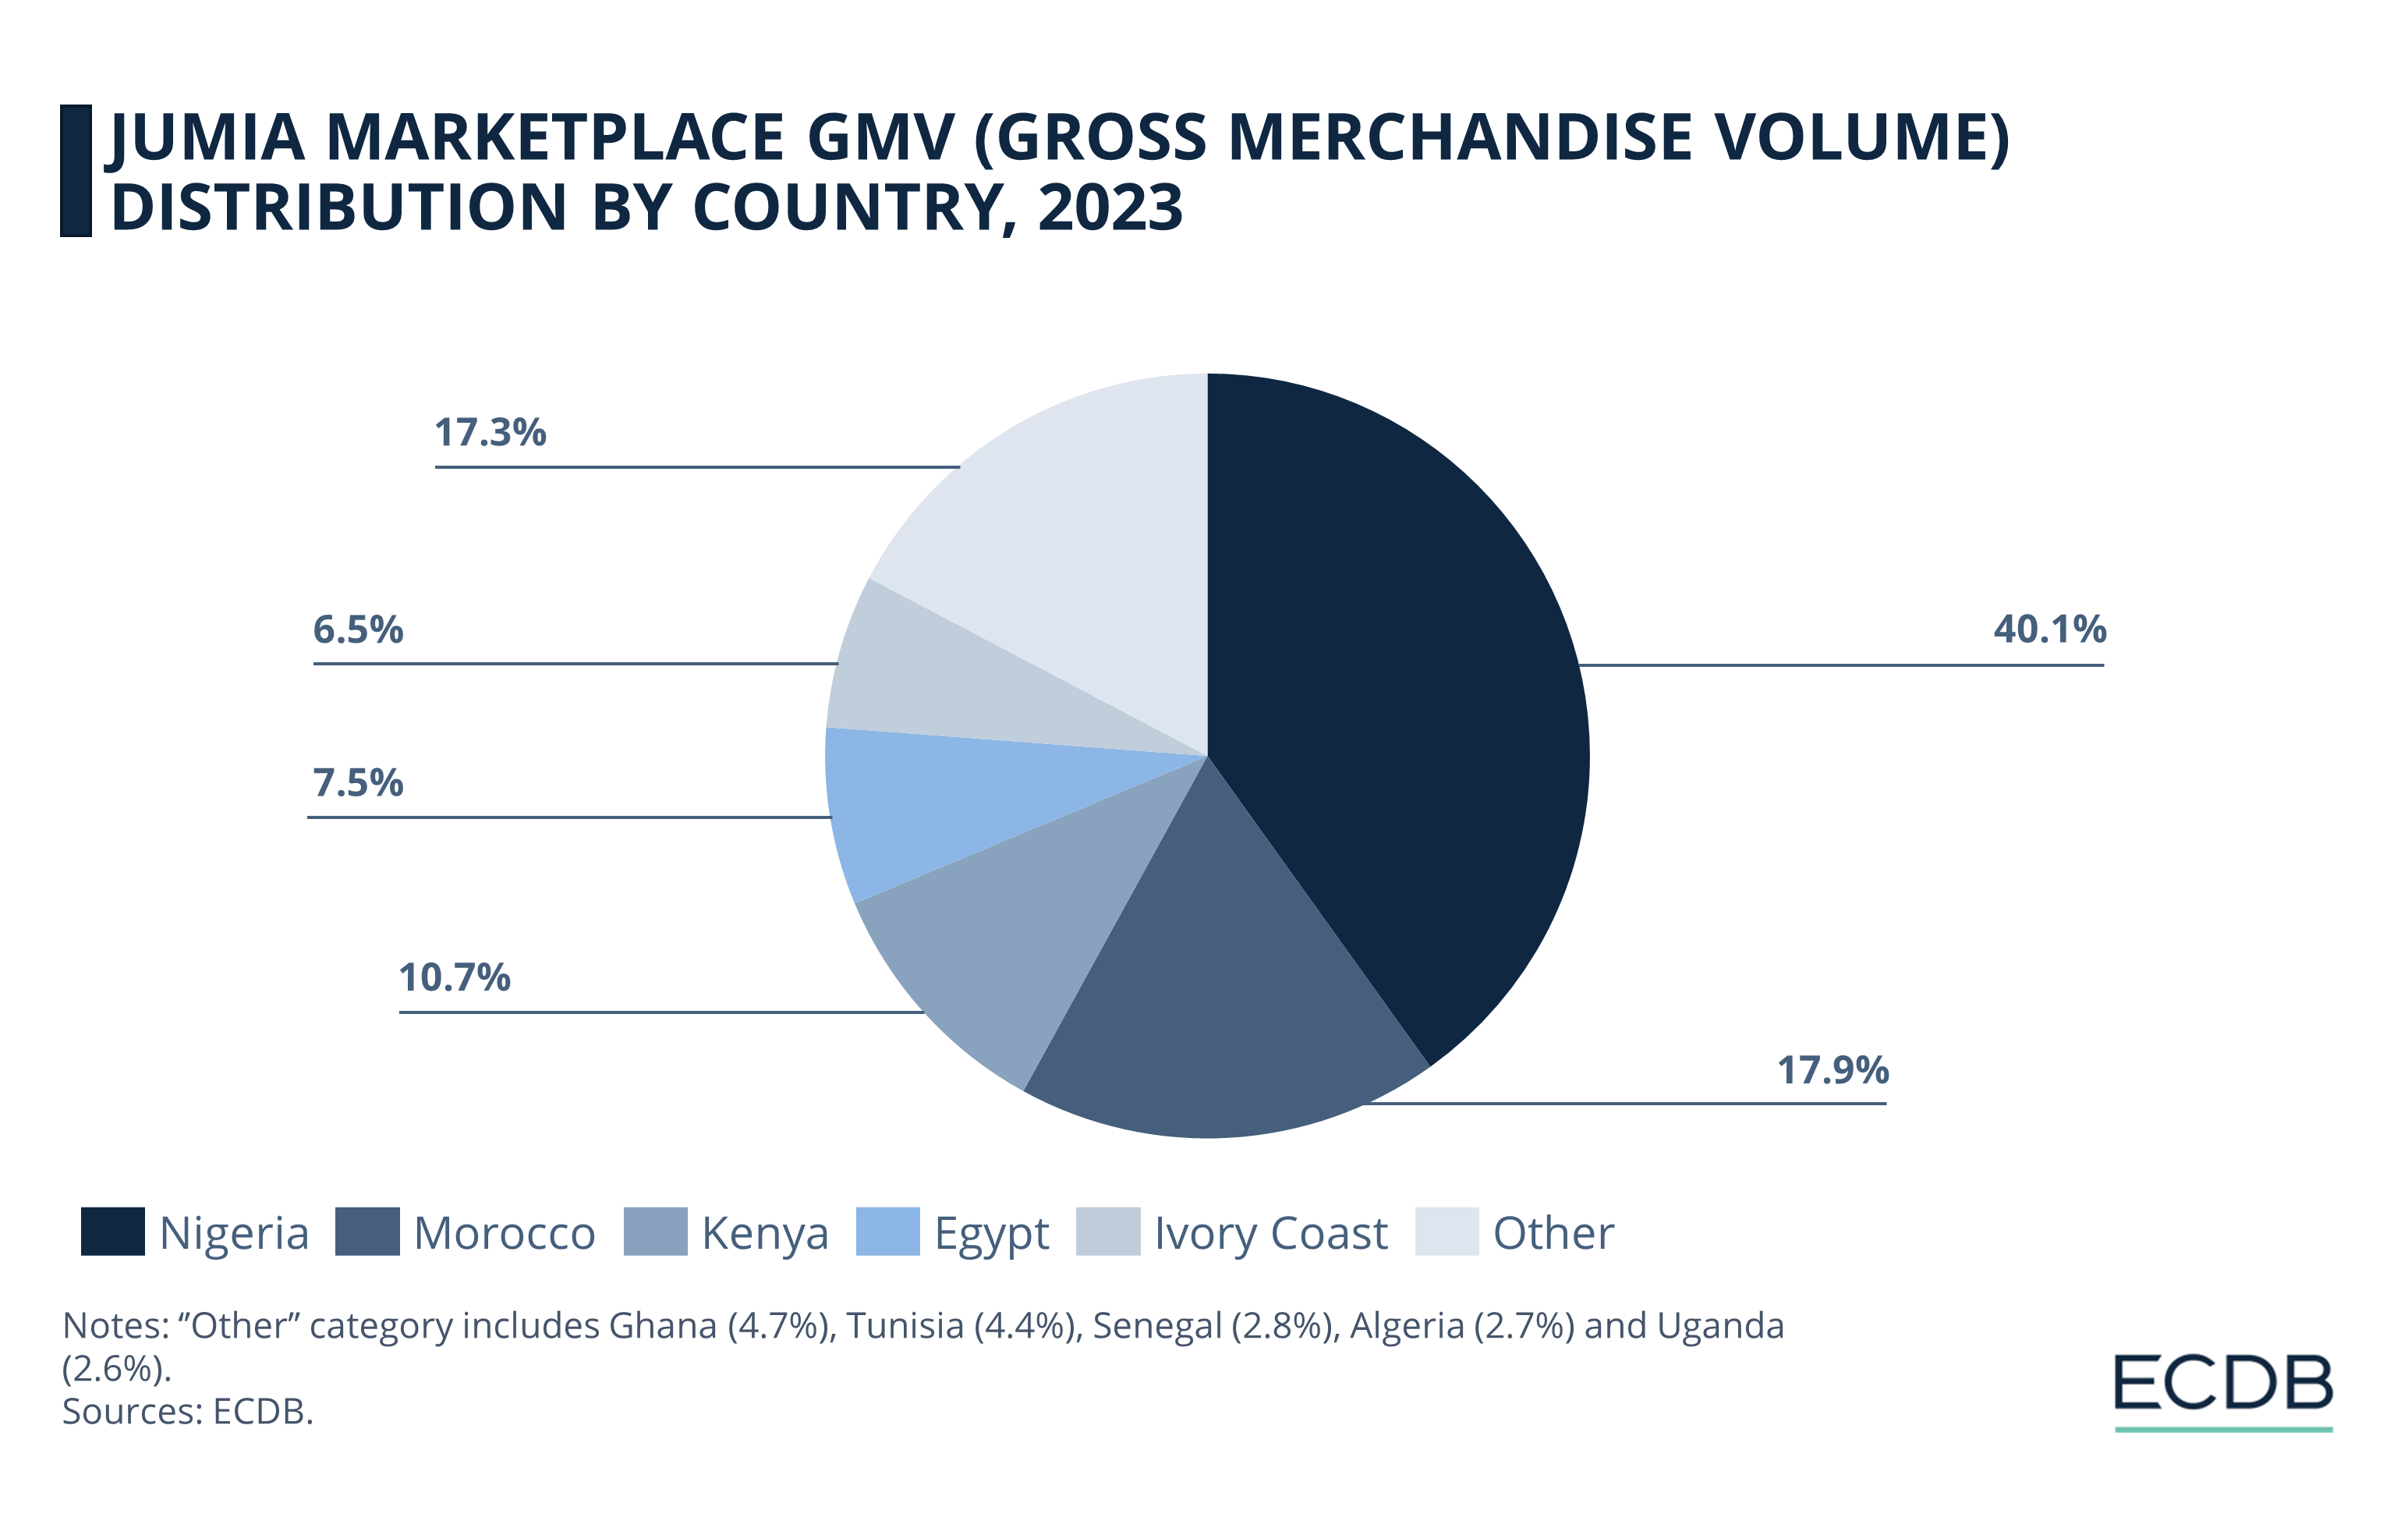 Jumia Marketplace GMV (Gross Merchandise Volume) Distribution by Country, 2023